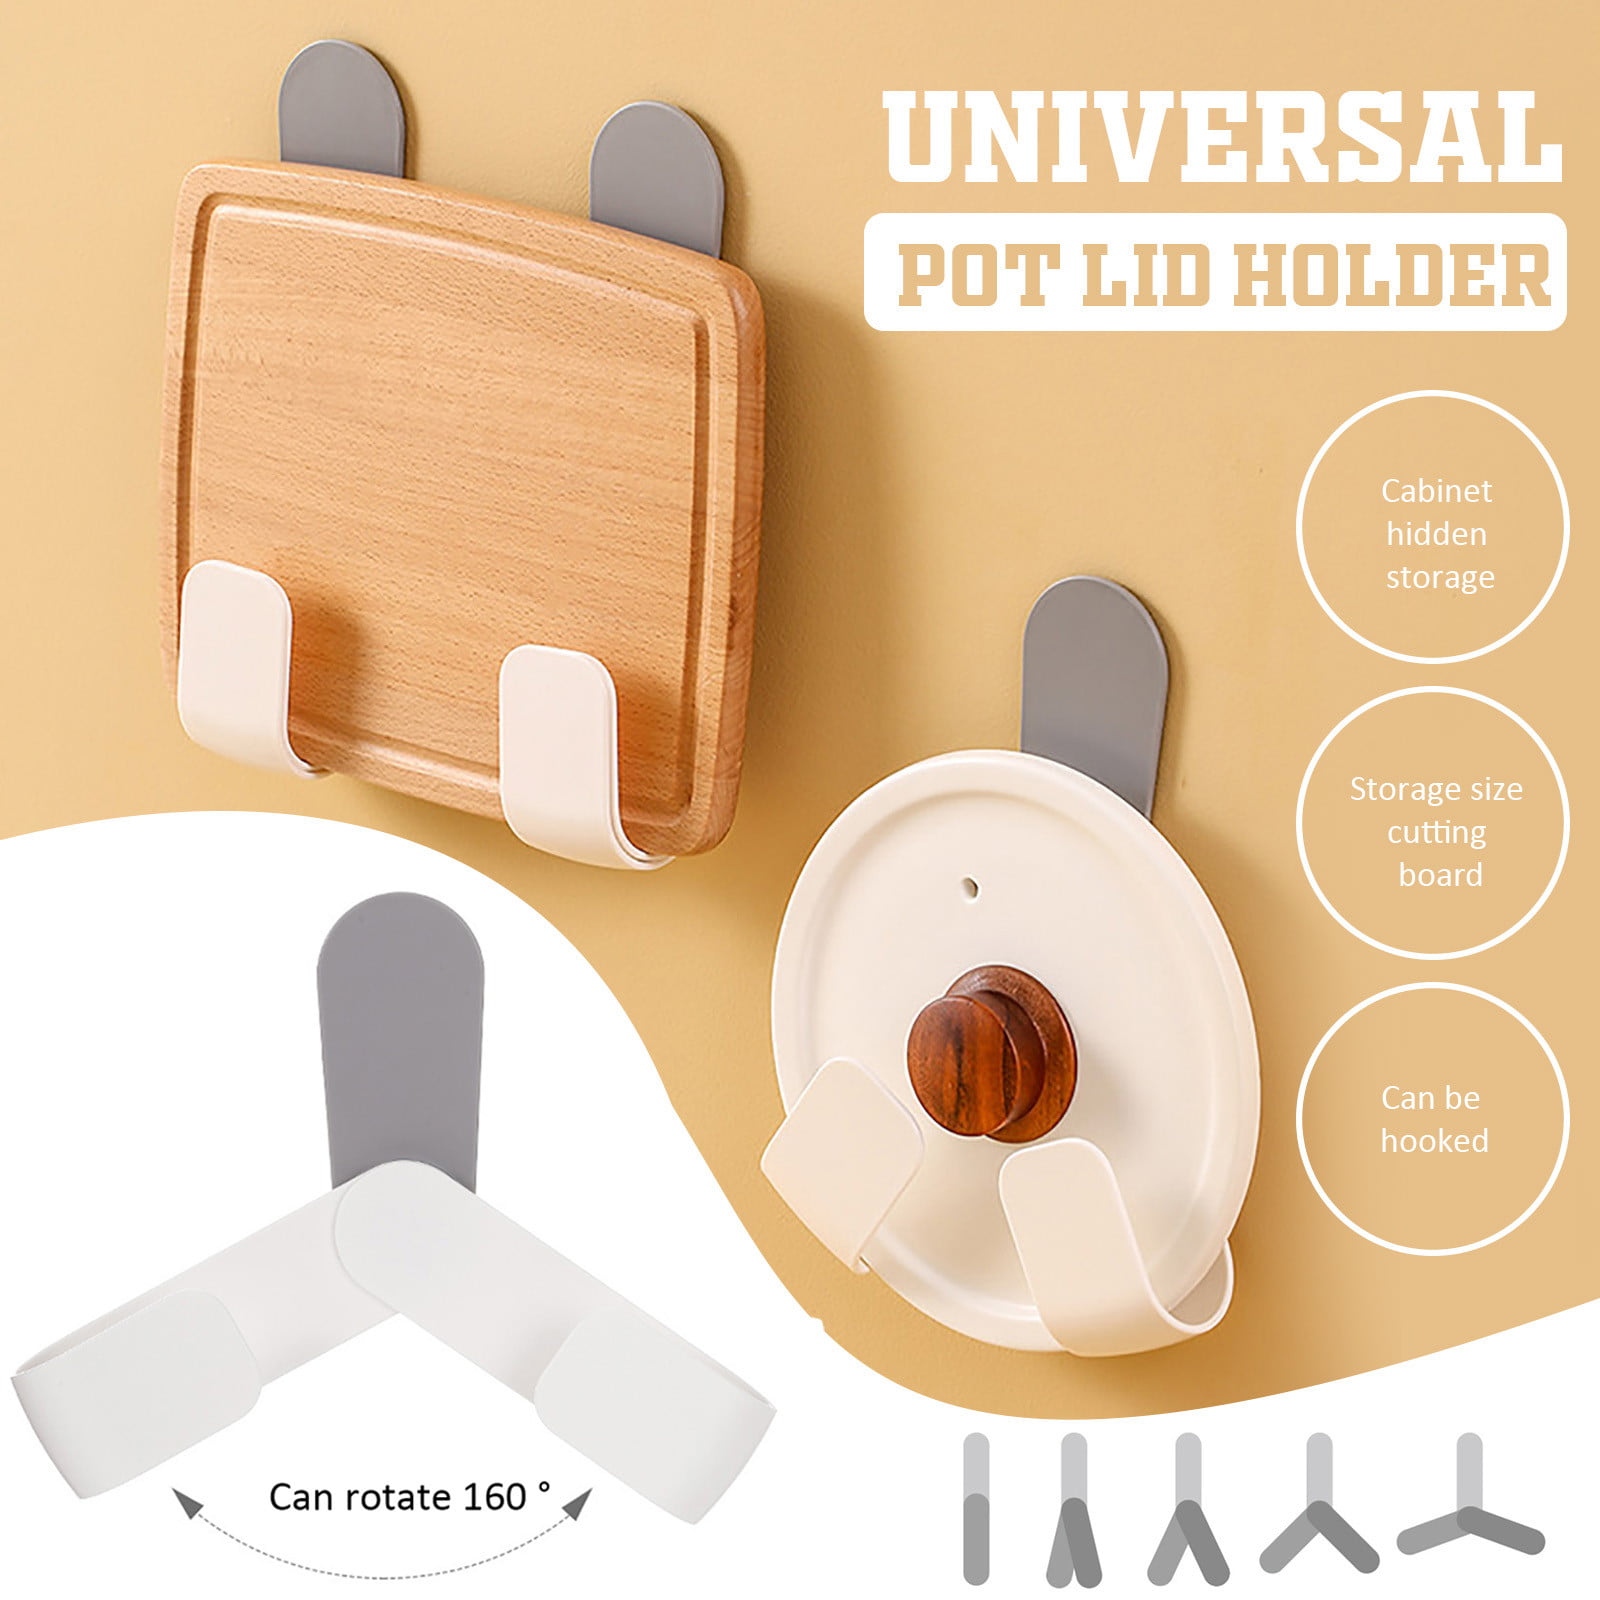 Details about   Pot Lid Holder Unperforated Pan Wall Mounted Storage Rack Holder Kitchen Gadget 